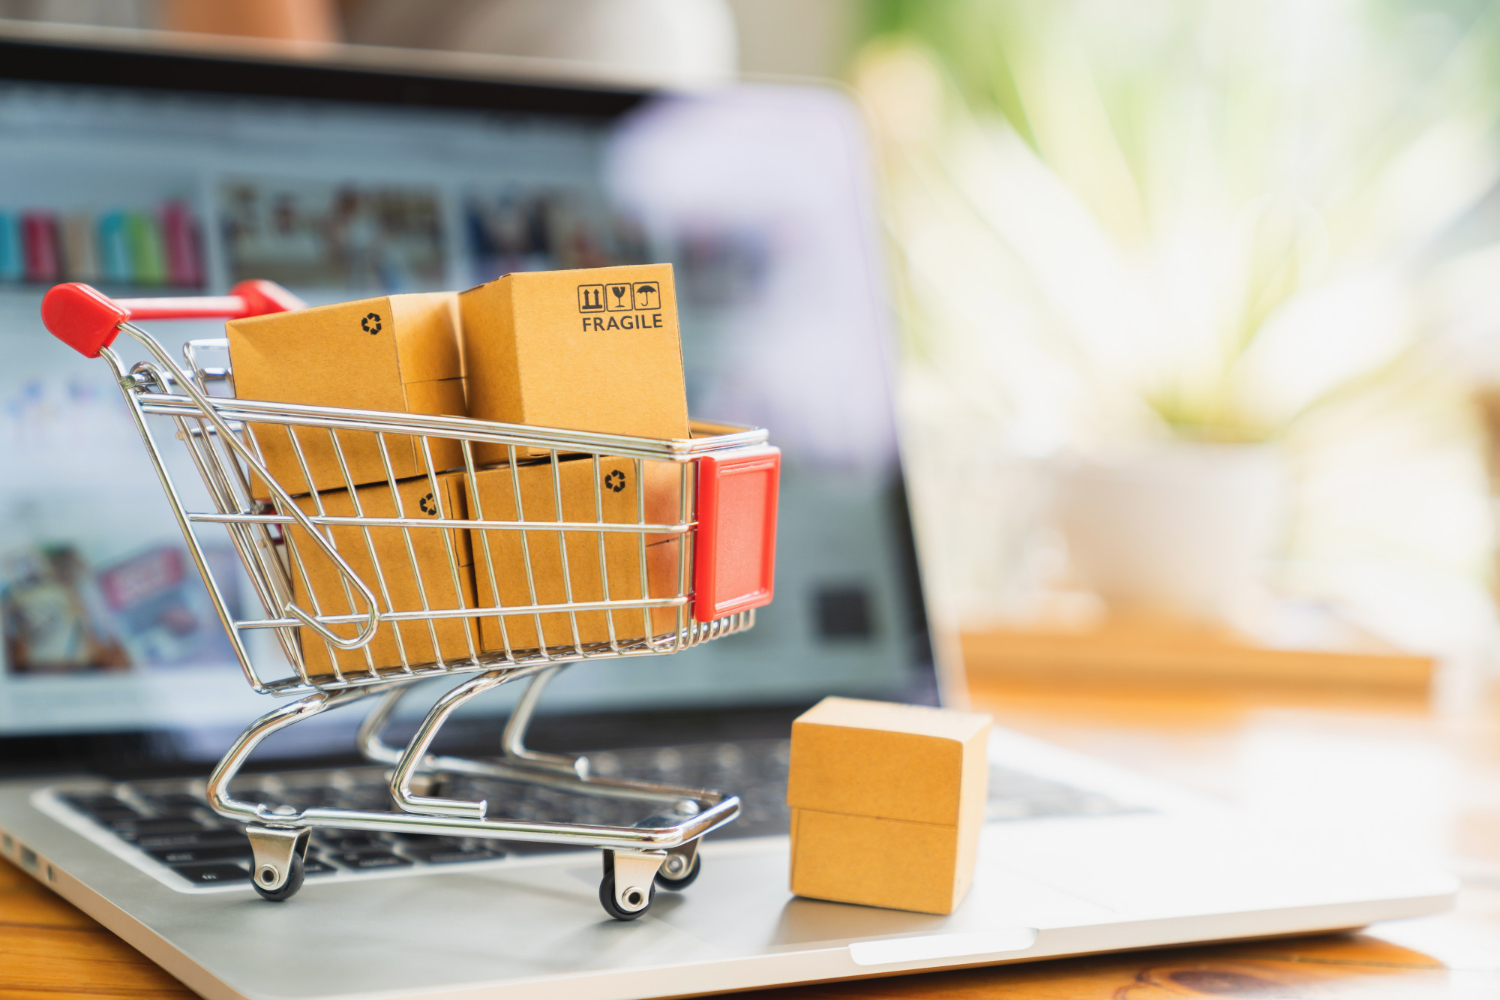 online-shopping-and-delivery-concept-product-package-boxes-in-cart-and-laptop.jpg